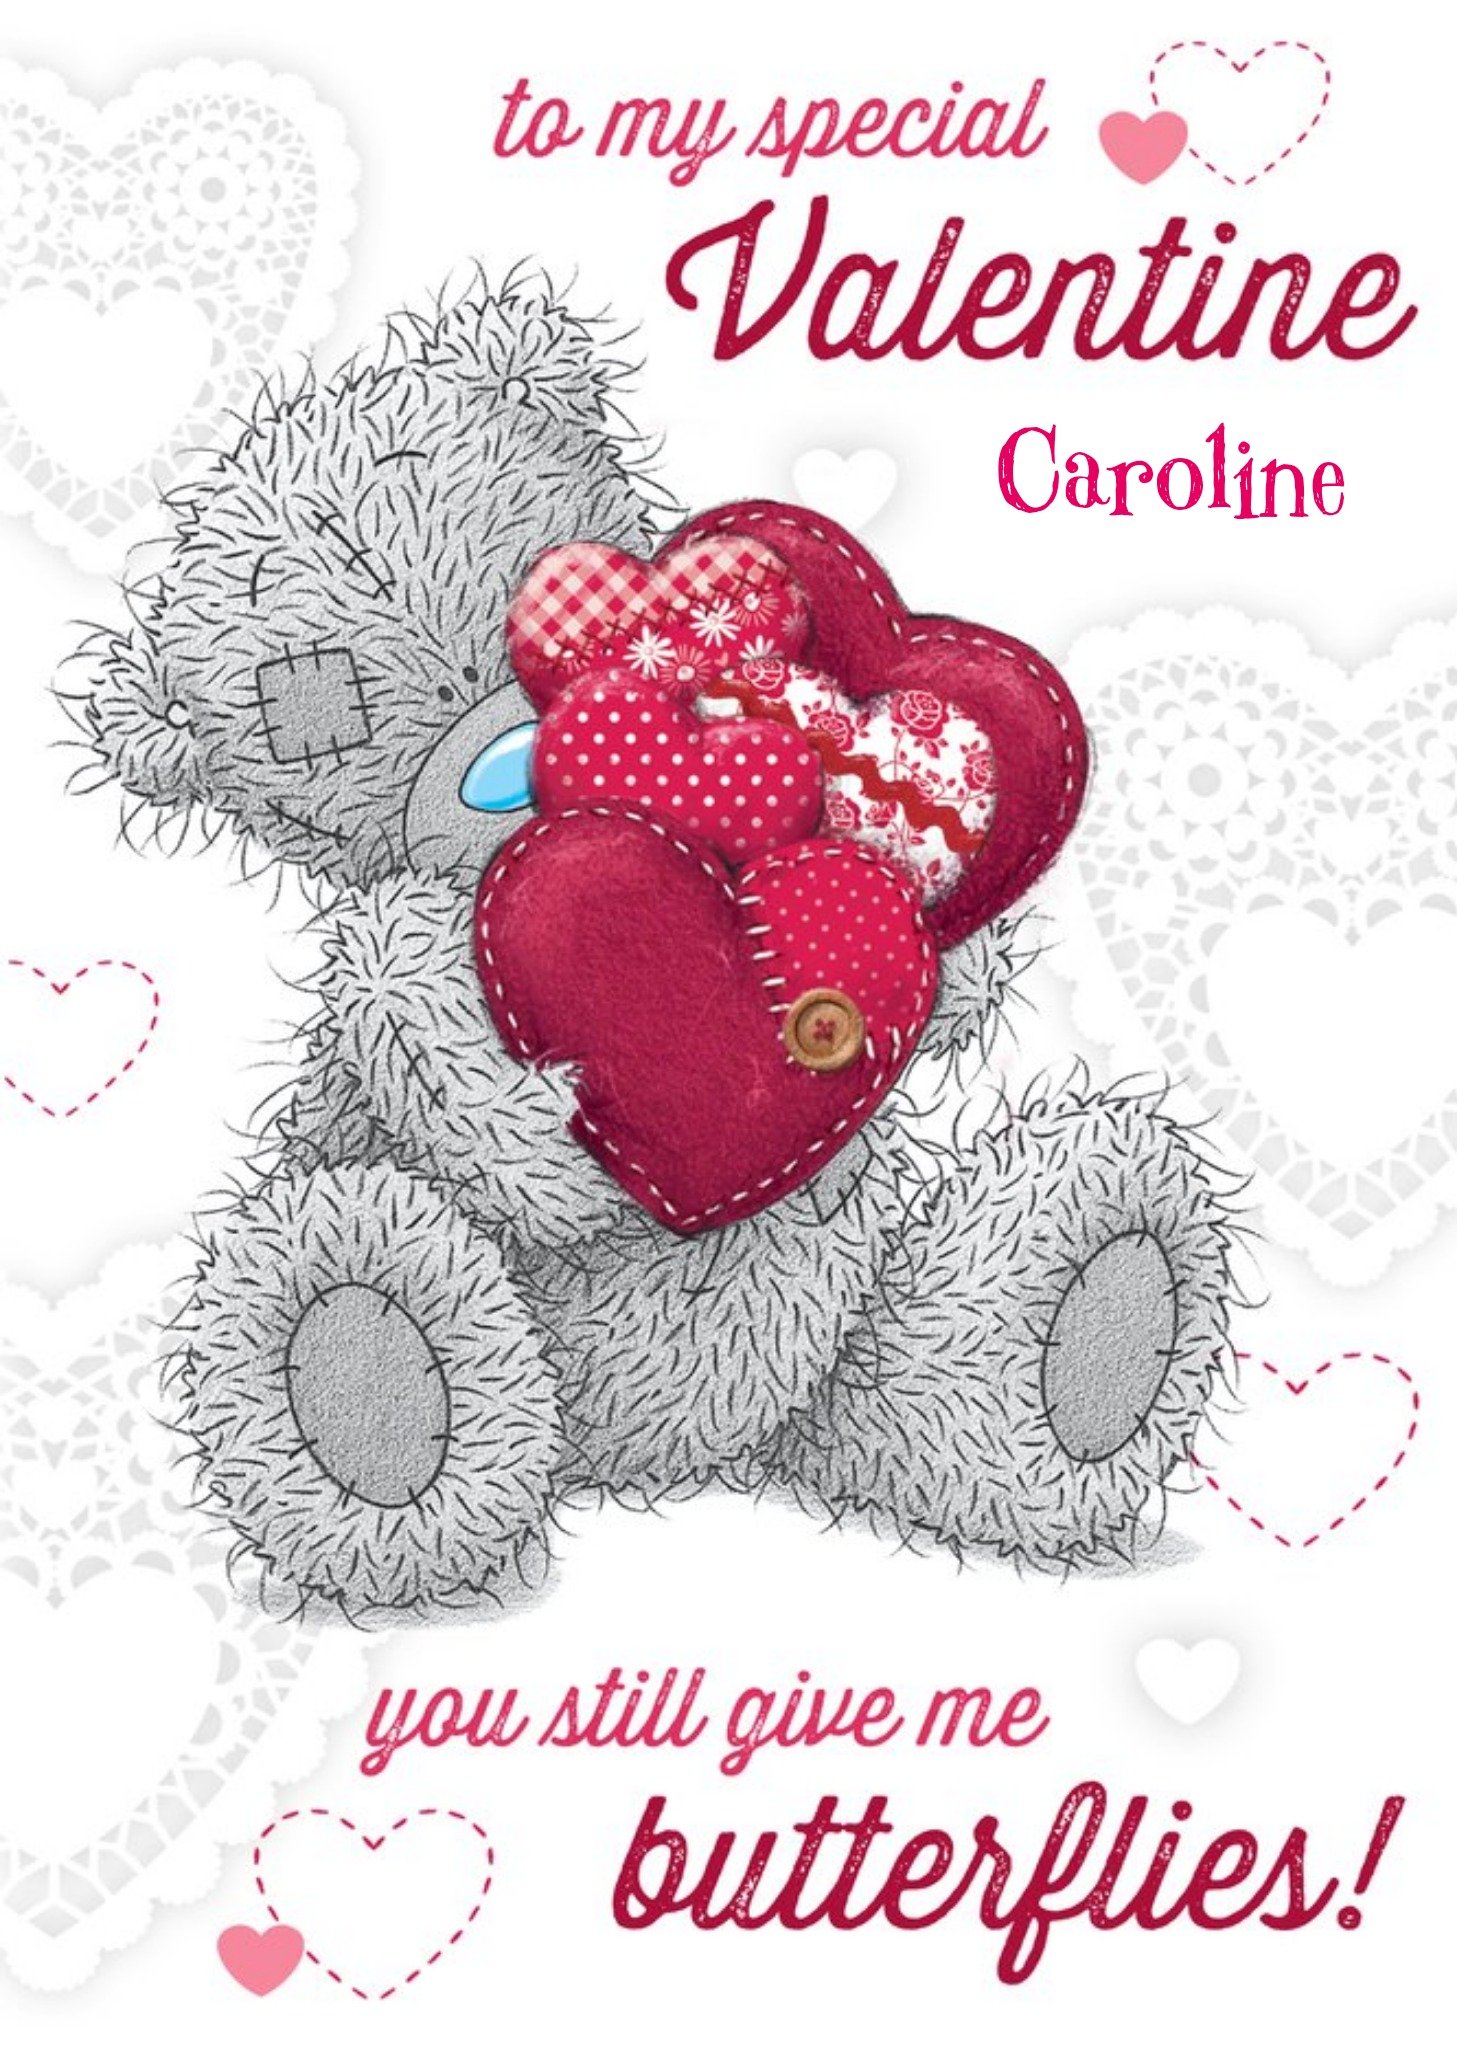 Me To You Tatty Teddy With Hearts You Give Me Butterflies Happy Valentine's Day Card Ecard